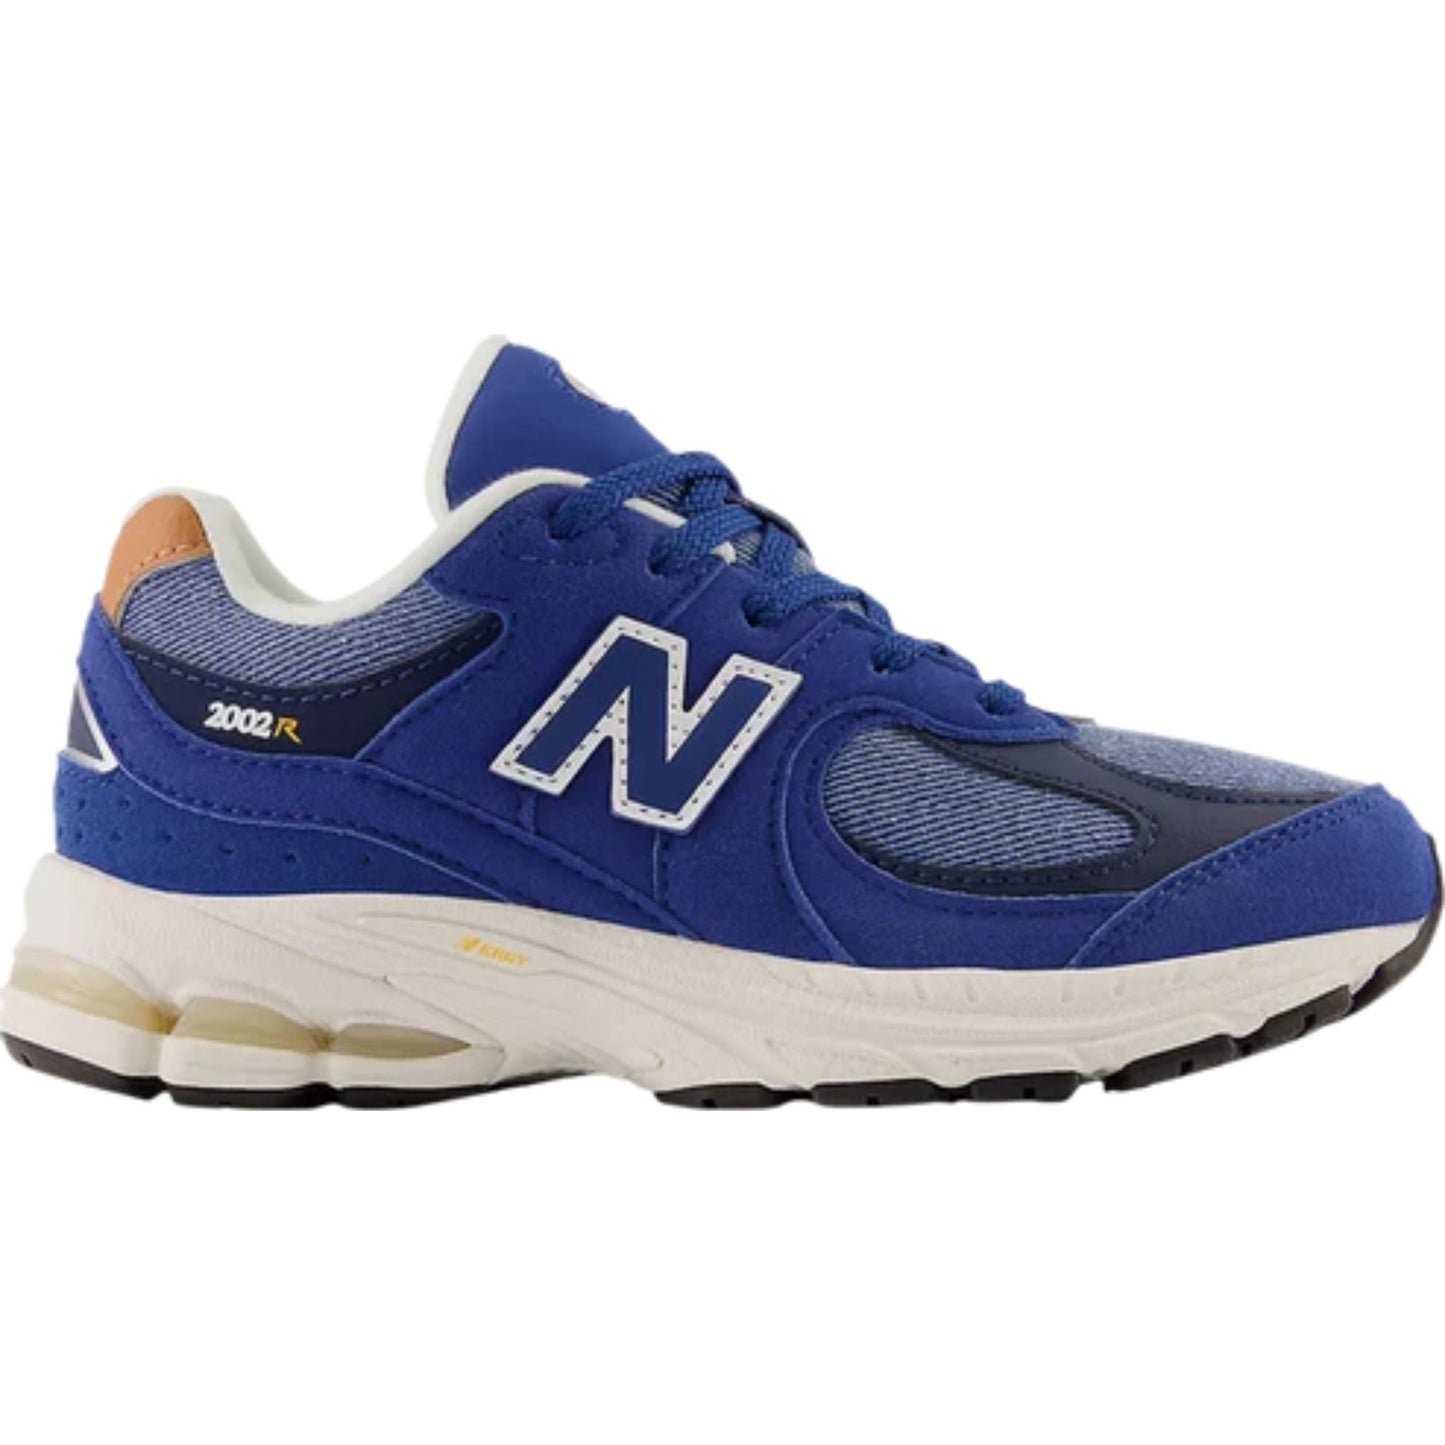 Blue: A stylish pair of New Balance sneakers in blue, perfect for casual or athletic wear